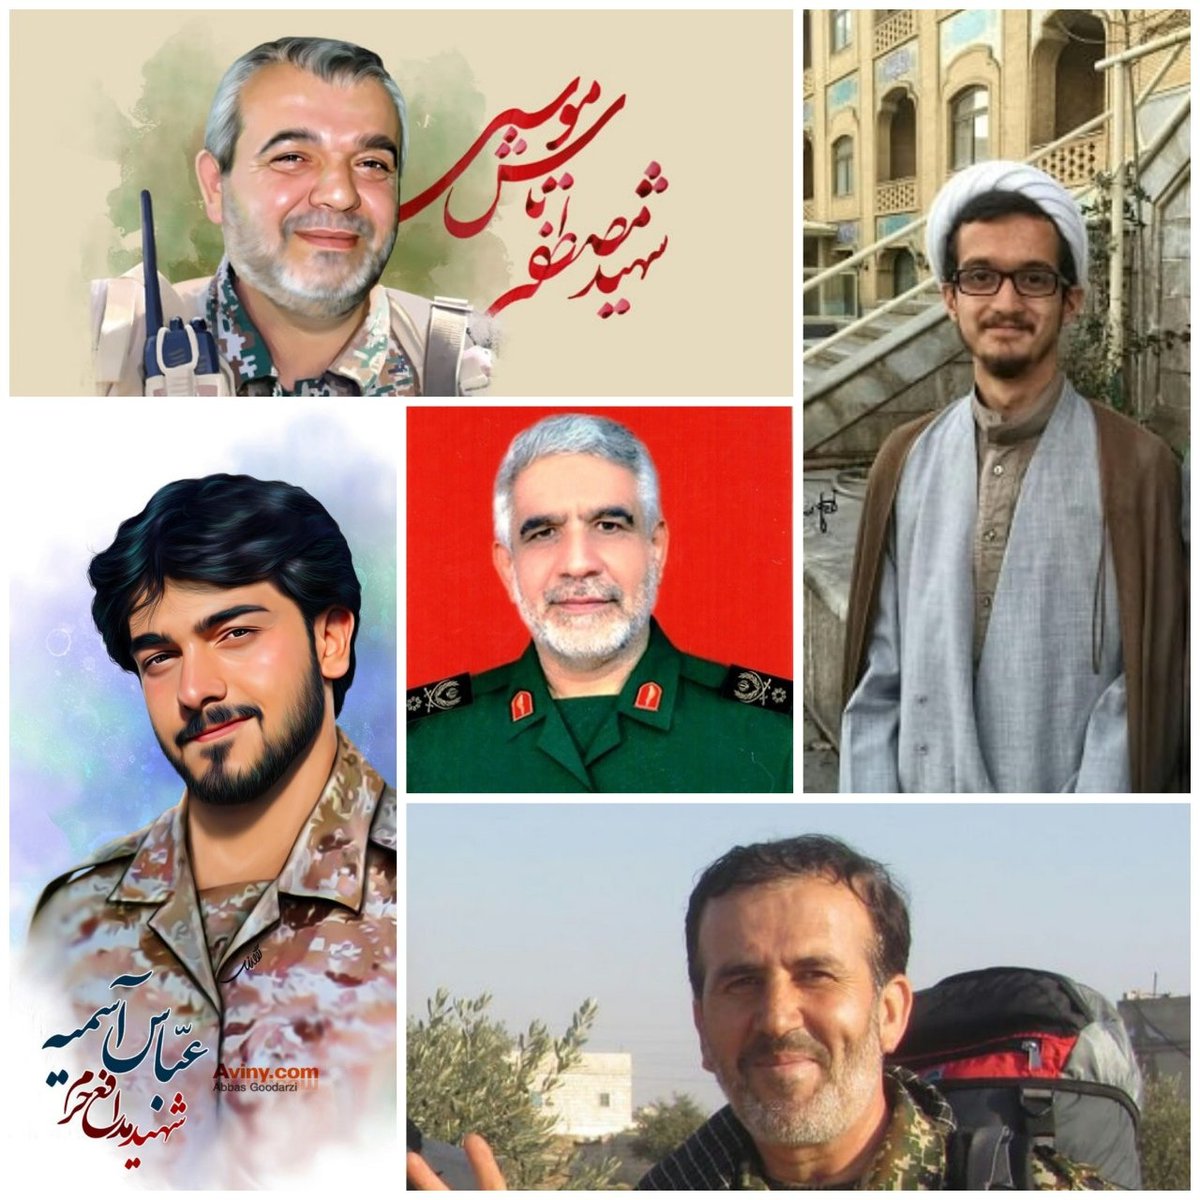 Iran’s Revolutionary Guards Retrieved Remains Of Five Of Its Members Who Were Killed In Syria